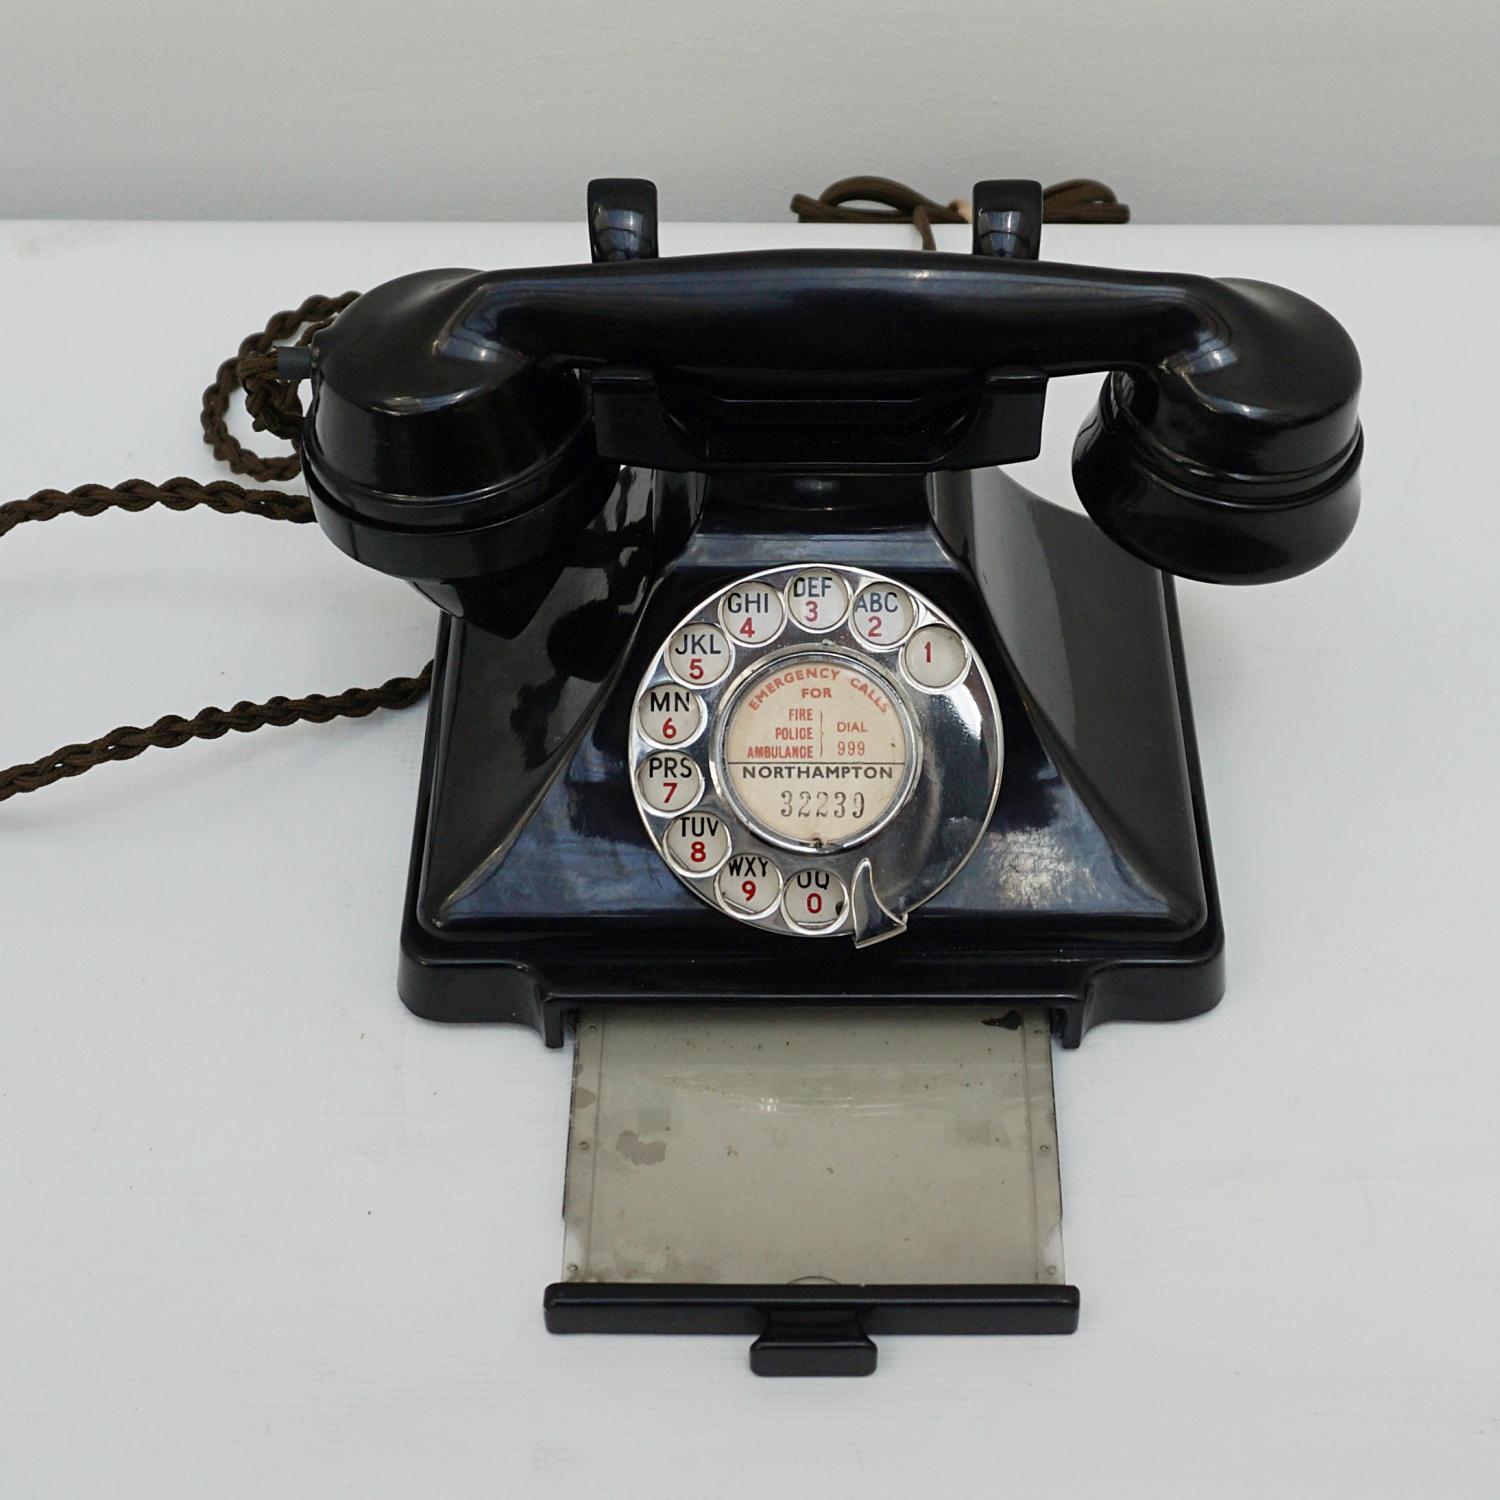 An original GPO model 232L Telephone. Black bakelite with integral drawer and braided handset cord. Registered number to face.

Dimensions: H 15cm W 20cm D 16cm

Origin: English

Date: 1938

Item No: N1703225

All of our telephones are